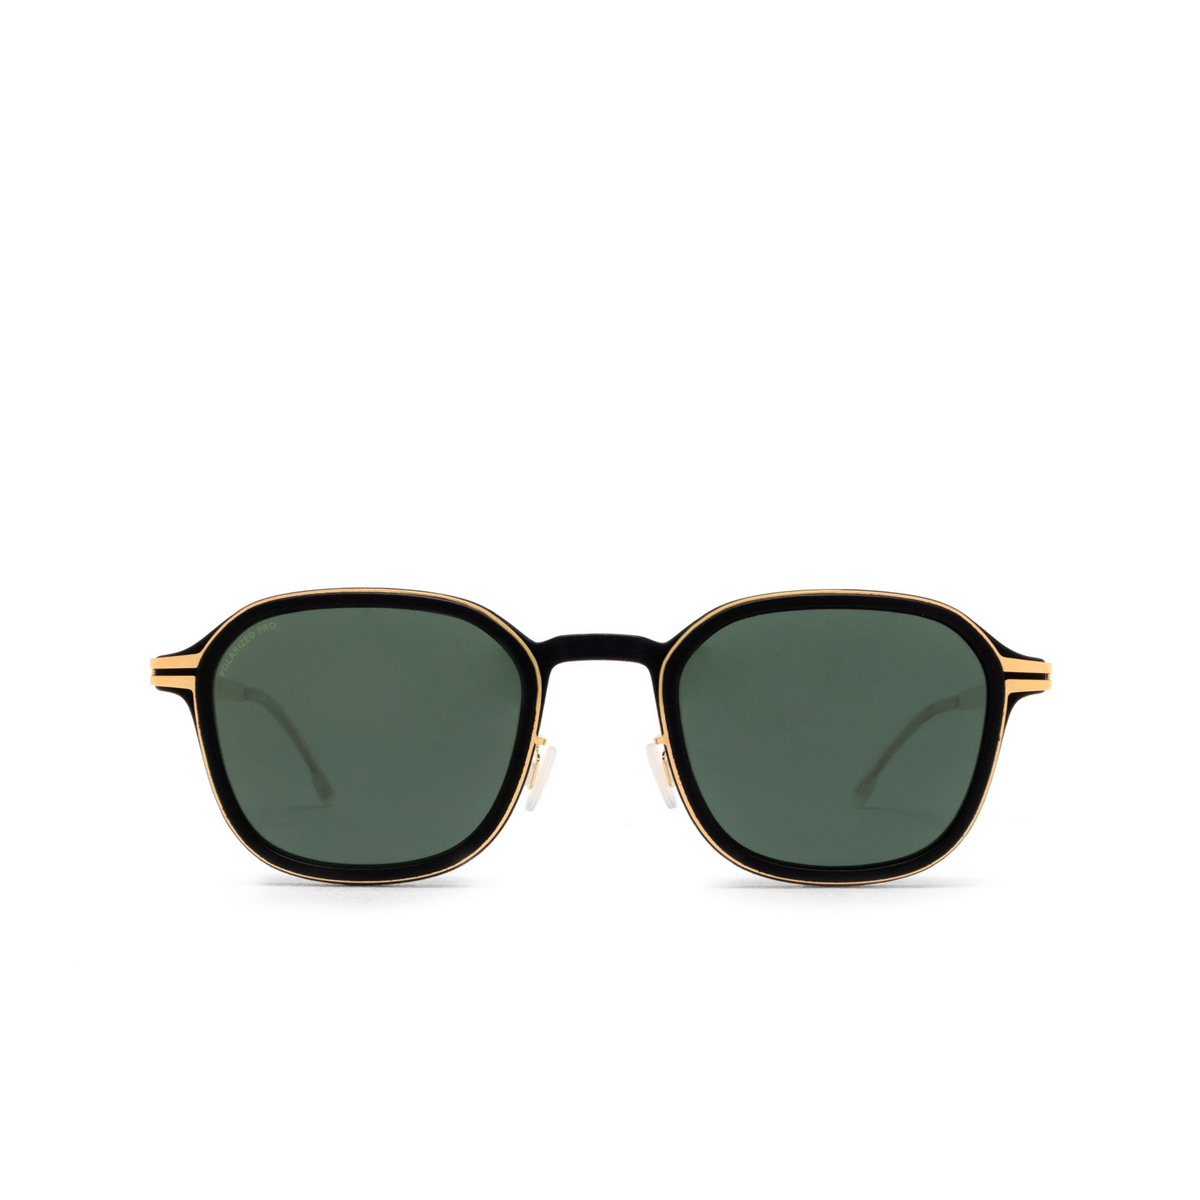 Mykita® Square Sunglasses: Fir color 306 Mh7 Pitch Black/glossy Gold - front view